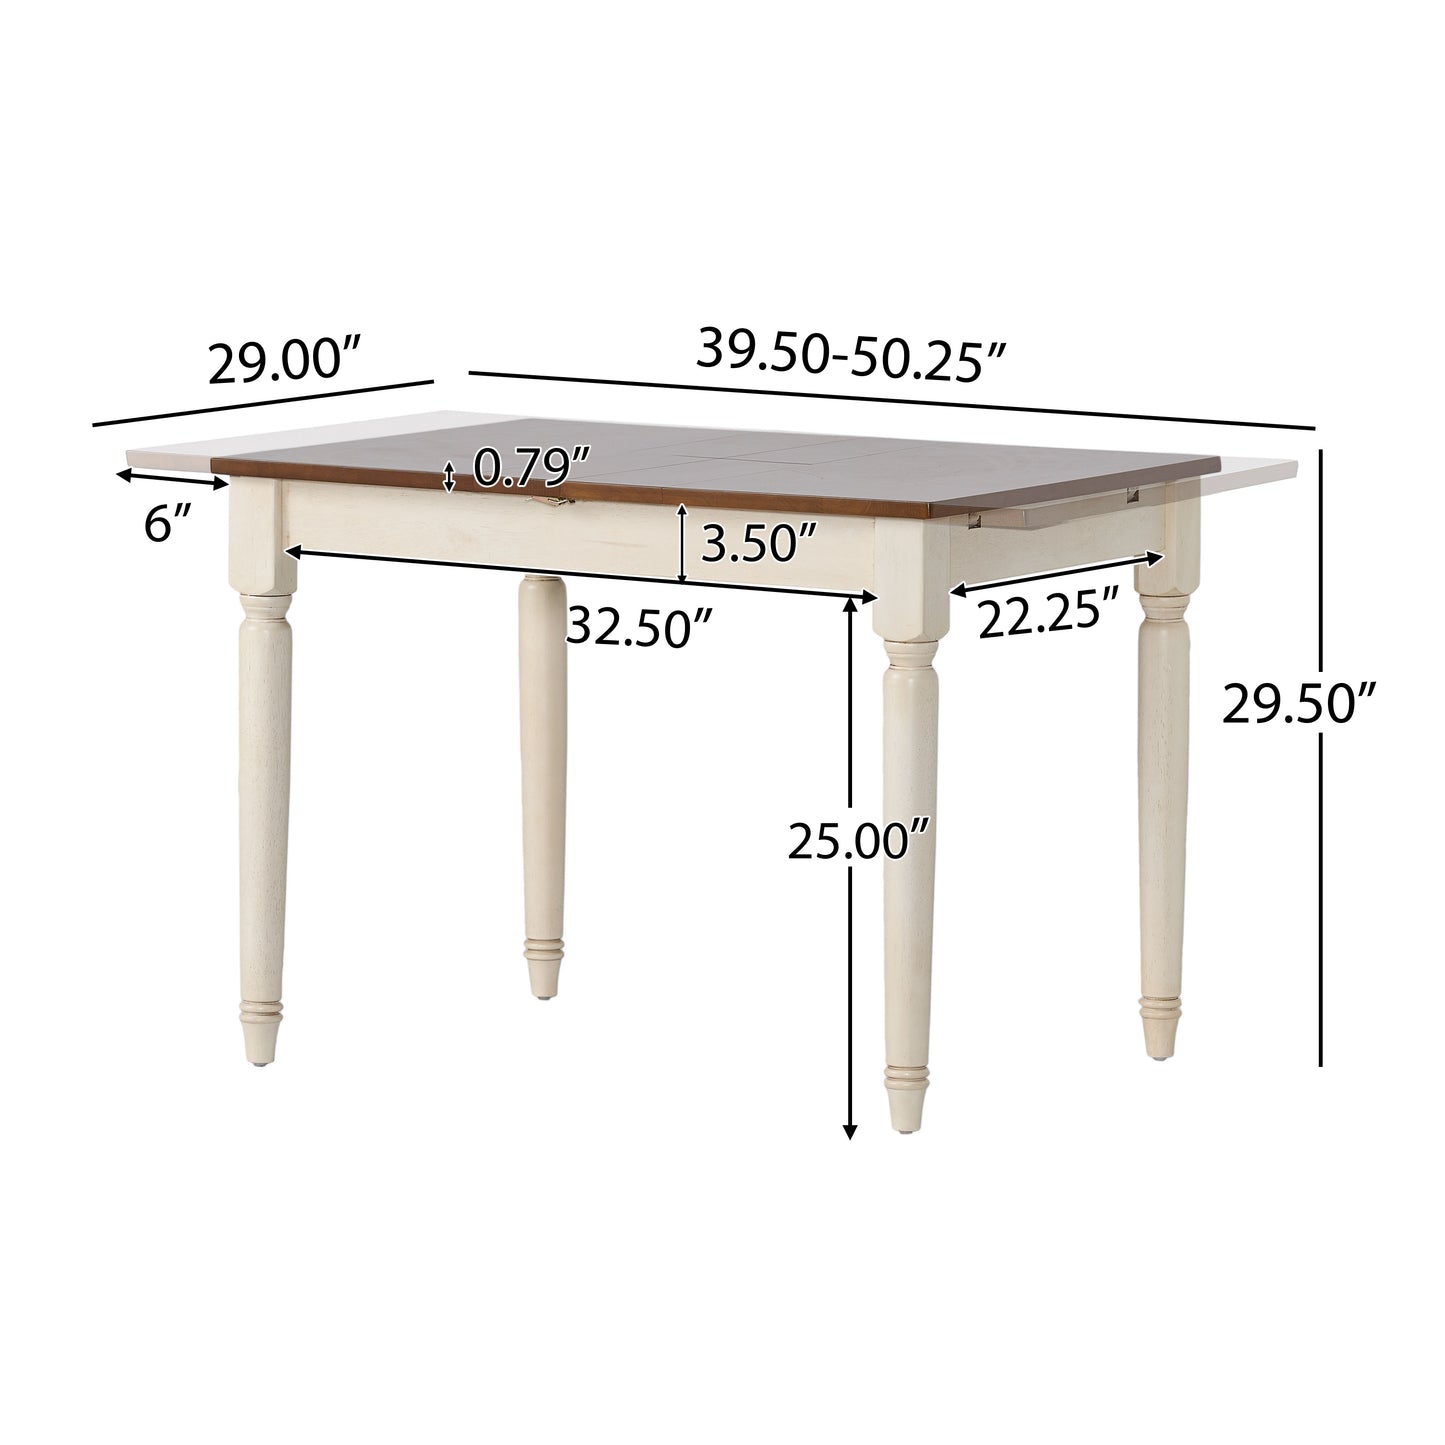 Broughton Rustic Wood Dining Table with Extendable Leaf, Dark Oak and Antique White